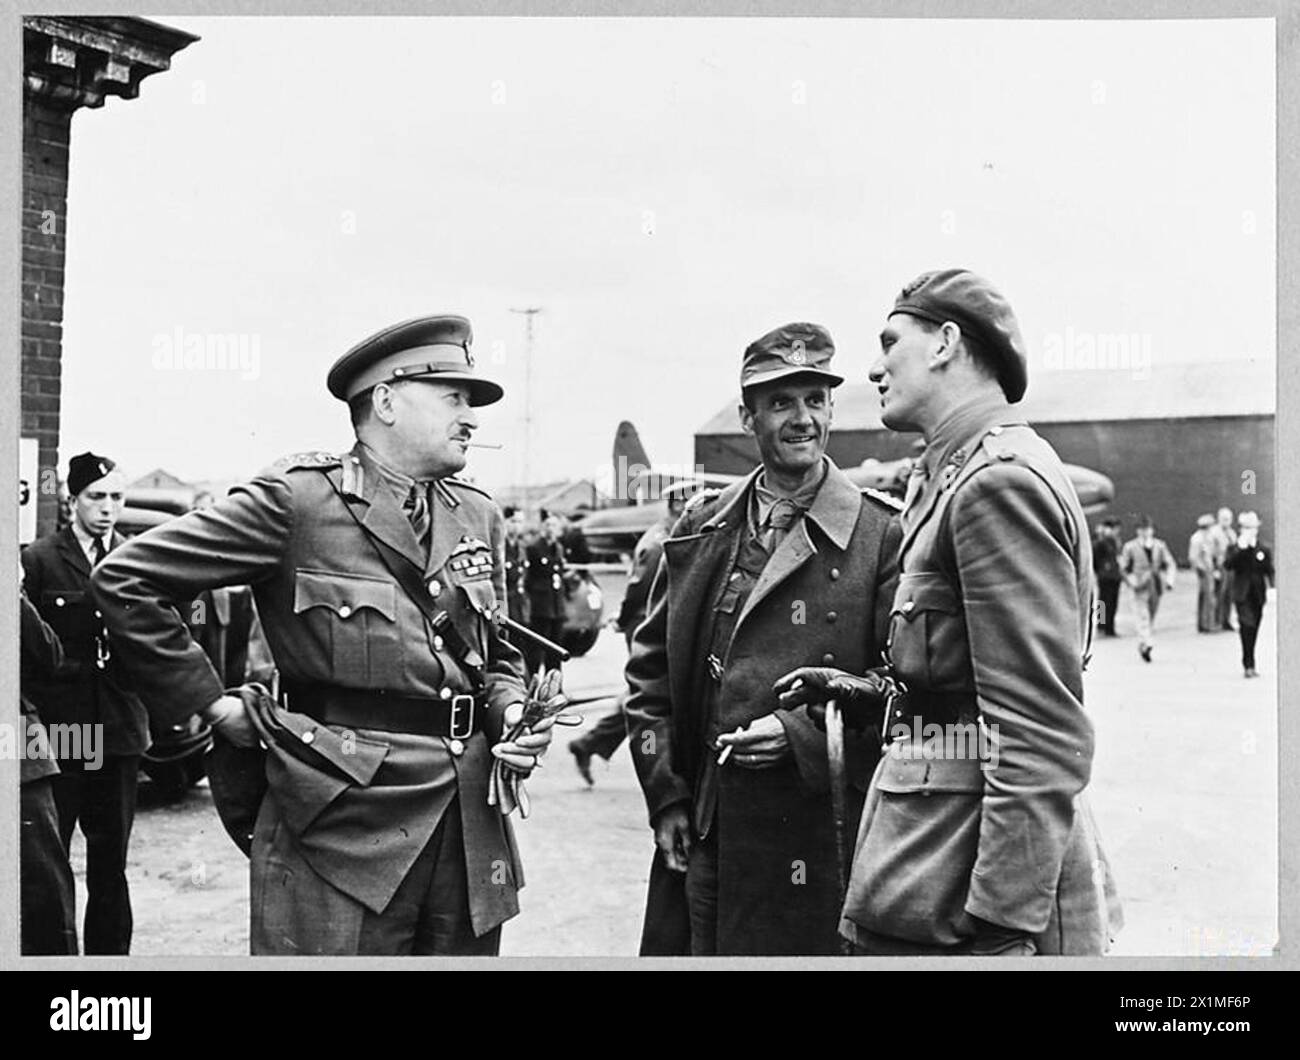 AXIS GENERALS ARRIVE IN SOUTH OF ENGLAND AS PRISONERS OF WAR. - 9958. Picture (issued 1943) shows - Colonel von Hulsen [centre] talking with escorting and receiving officers whilst awaiting transport to a prisoner of war camp, Royal Air Force Stock Photo